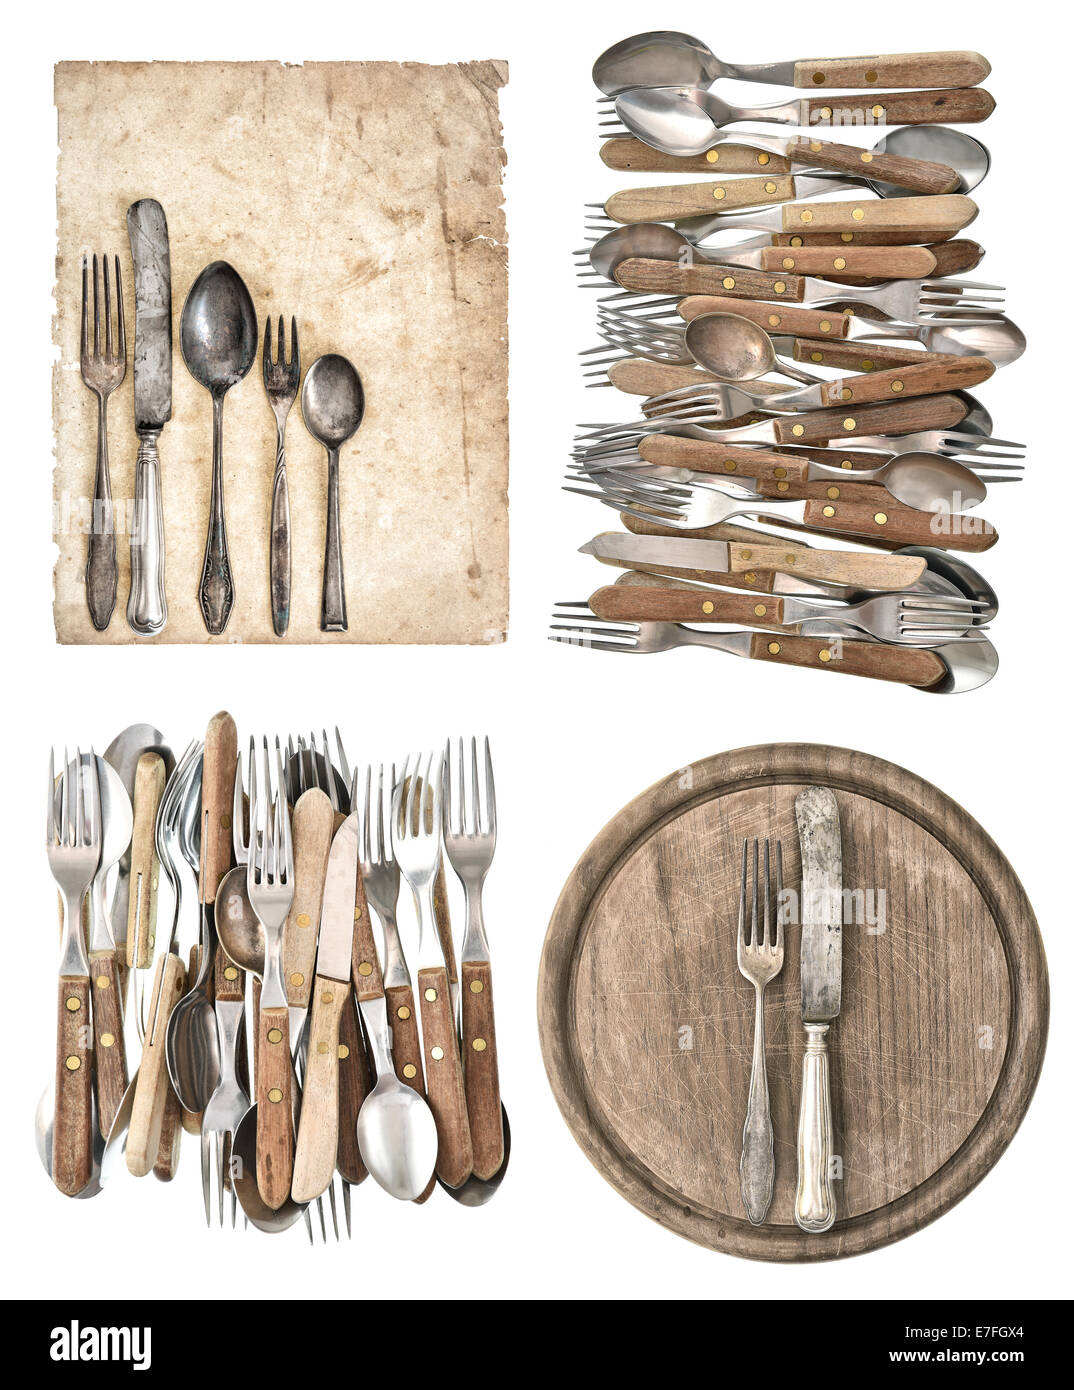 kitchen board, aged paper, antique kitchen utensils and vintage silver cutlery isolated on white background Stock Photo